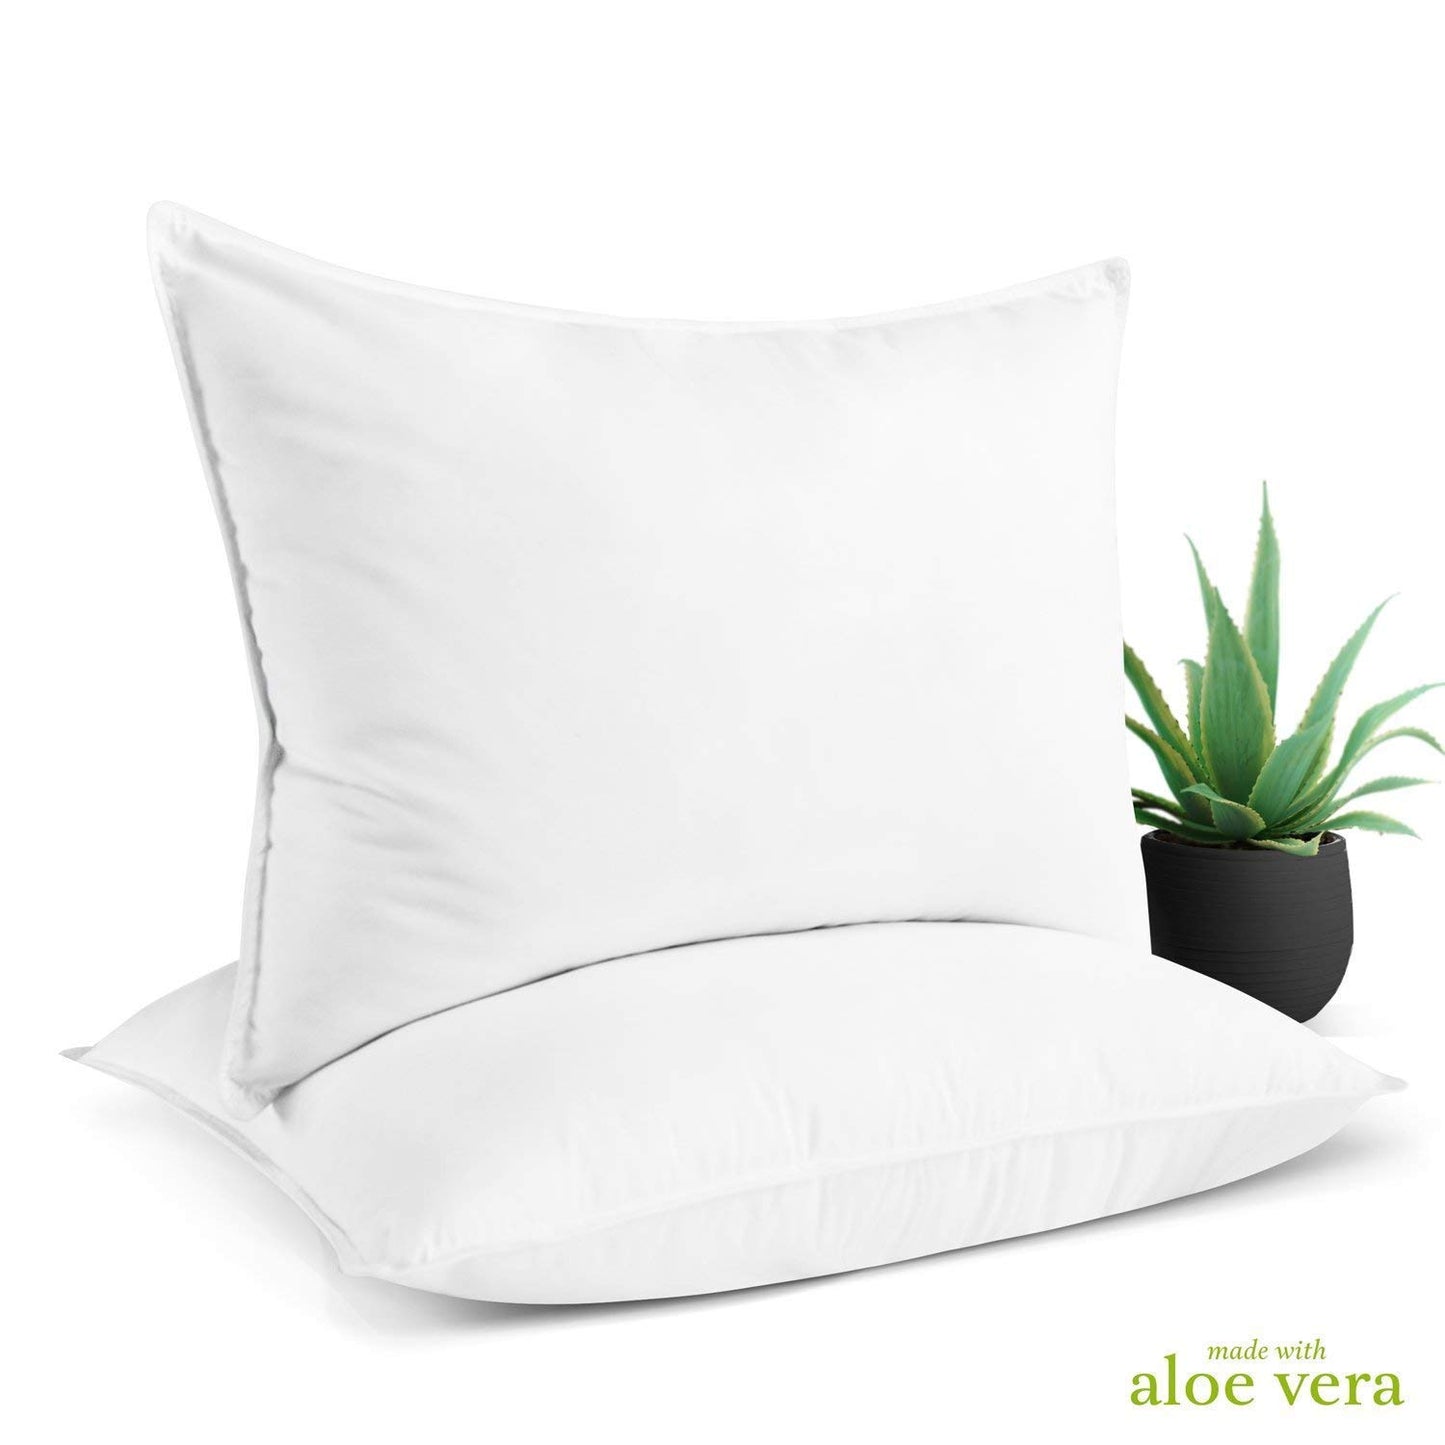 Aloe Vera Hotel Collection Gel Pillow (2 Pack) – Luxury Plush Pillows with All-Natural Pure Aloe Vera Treatment – Eco-Friendly, Hypoallergenic infused with Soothing/Moisturizing Aloe Vera - Queen